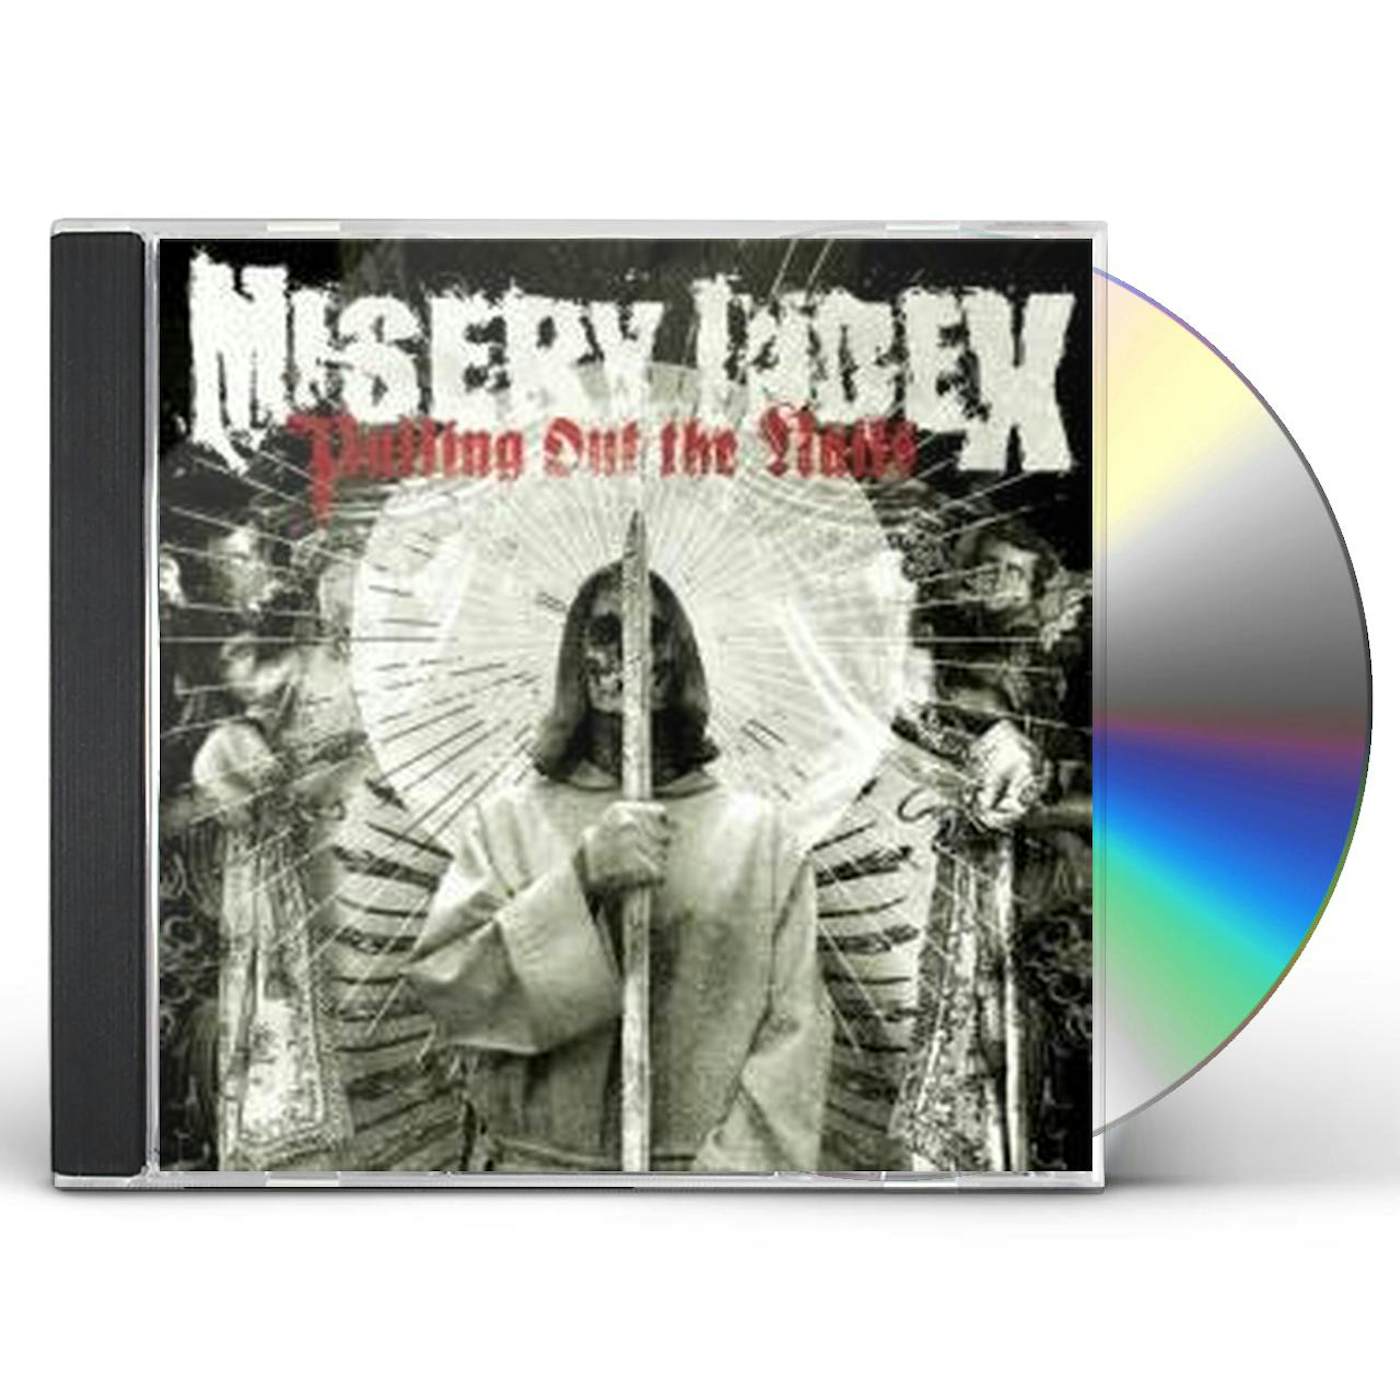 Misery Index PULLING OUT THE NAILS CD